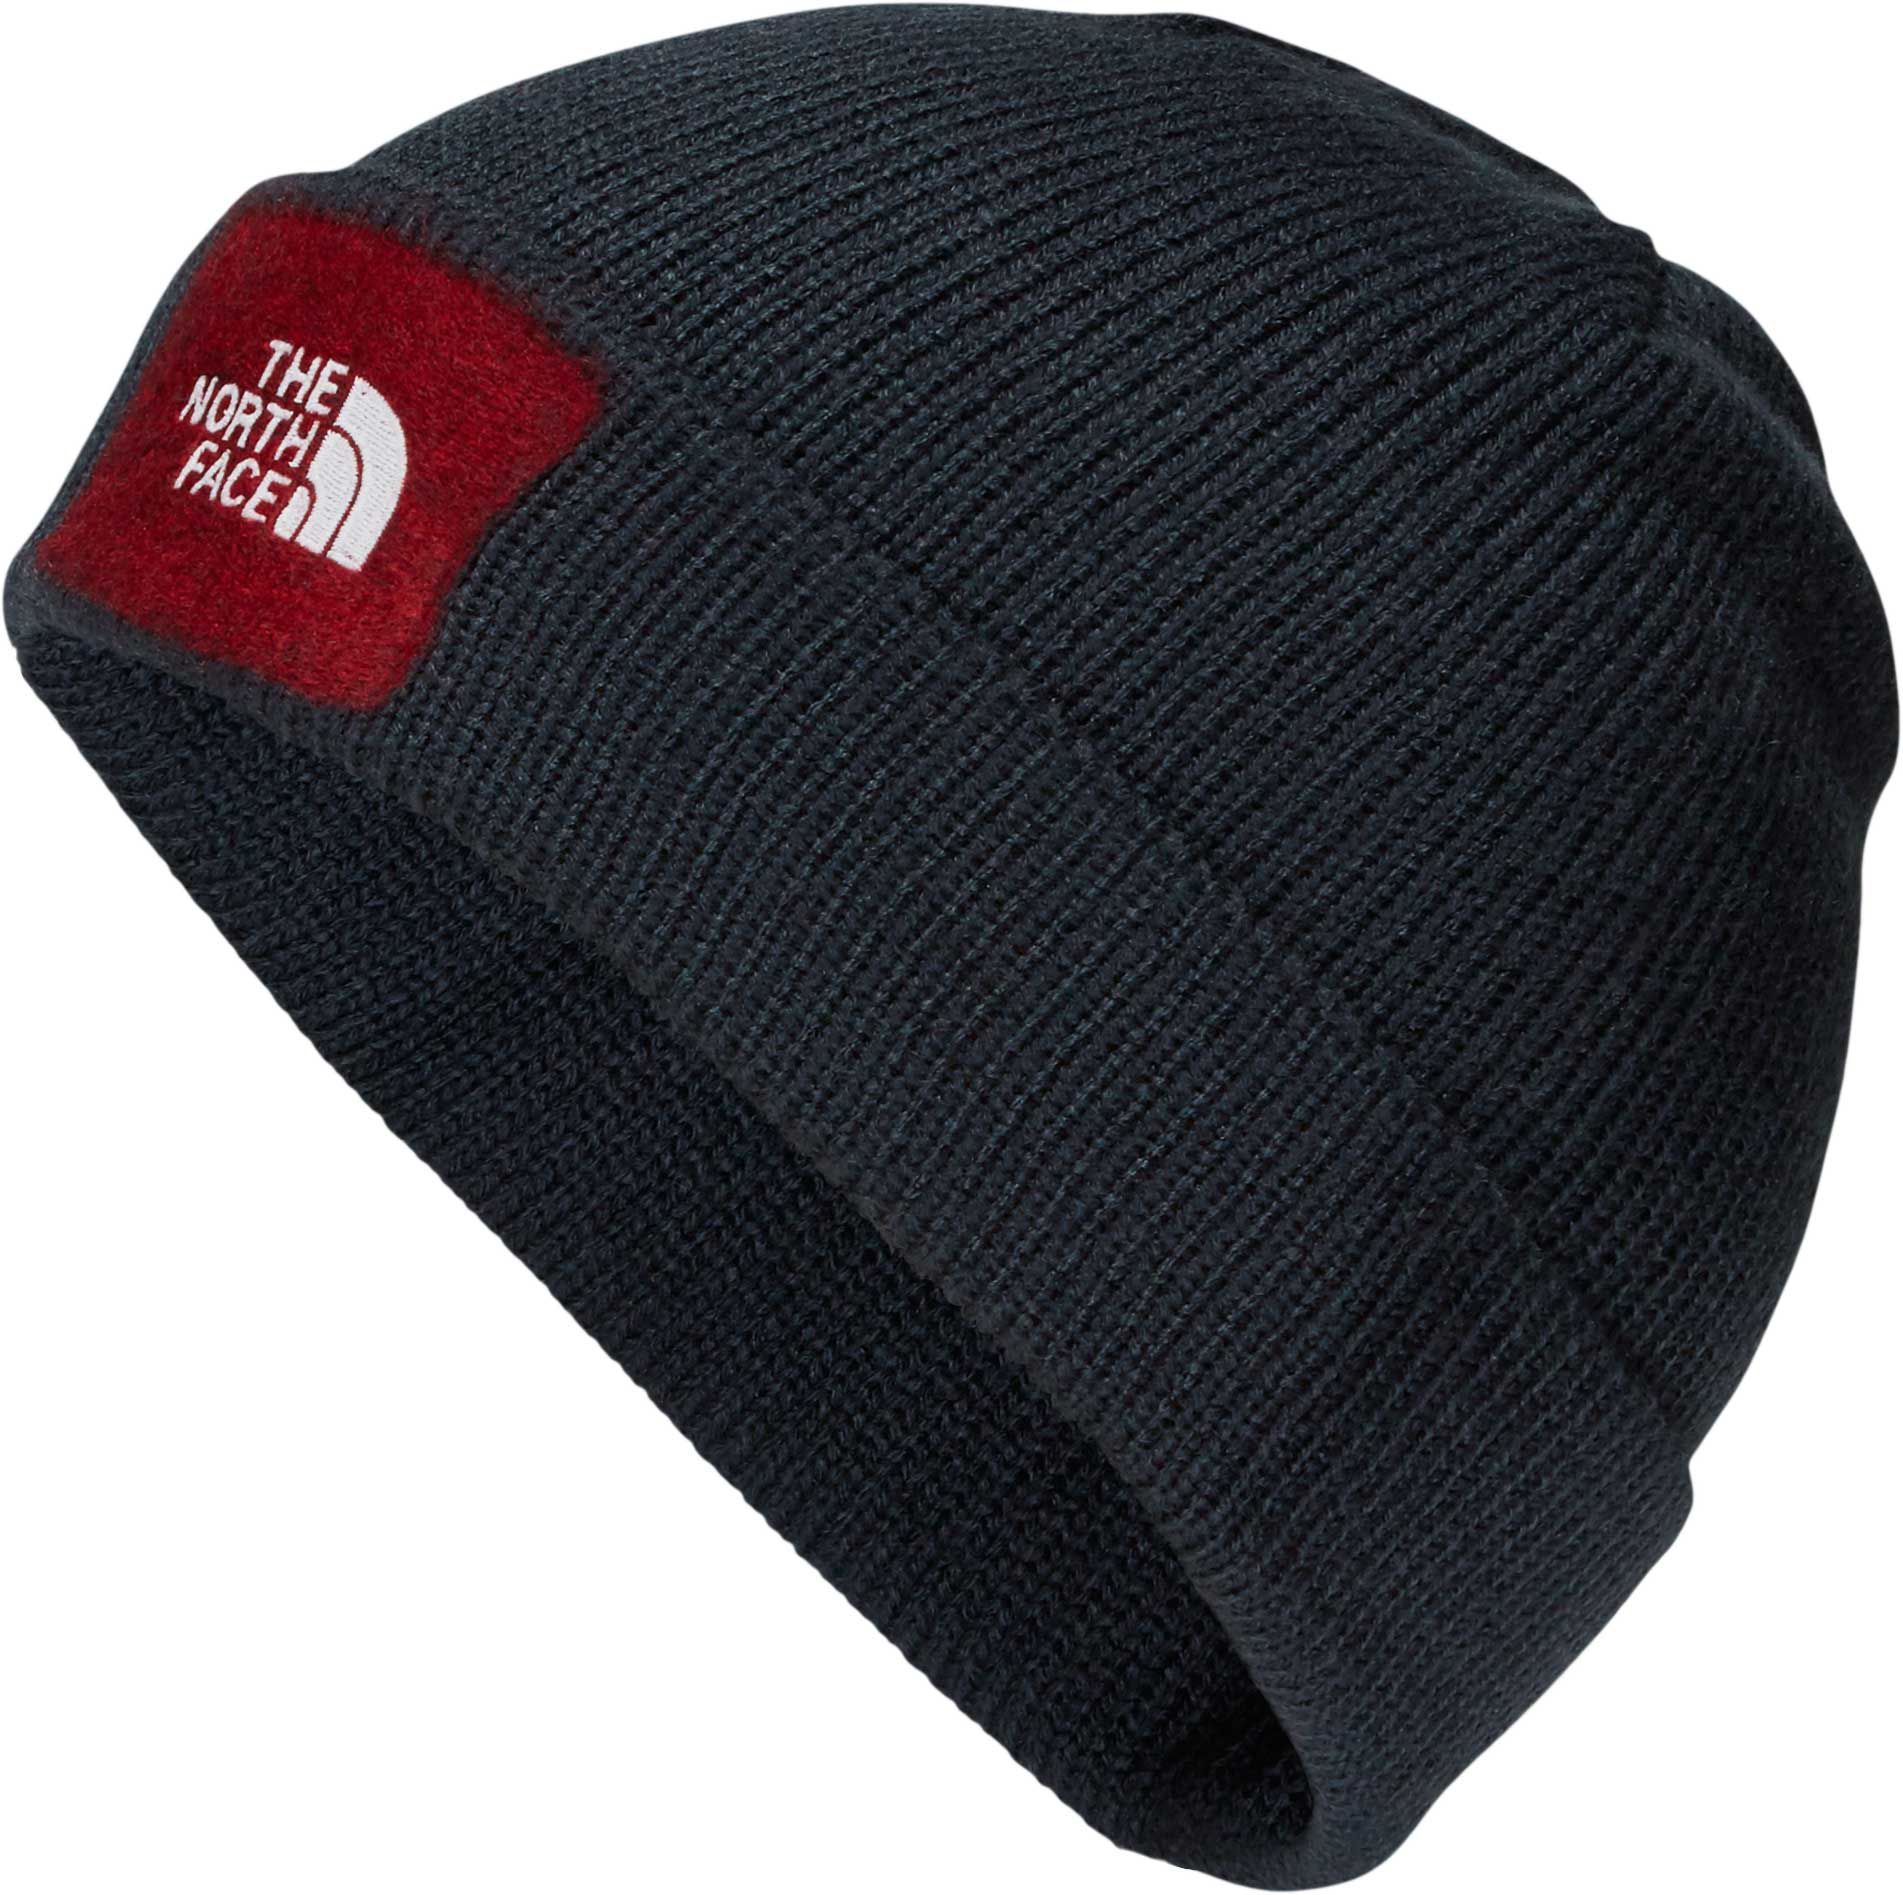 The North Face Men's Felted Logo Beanie | DICK'S Sporting Goods